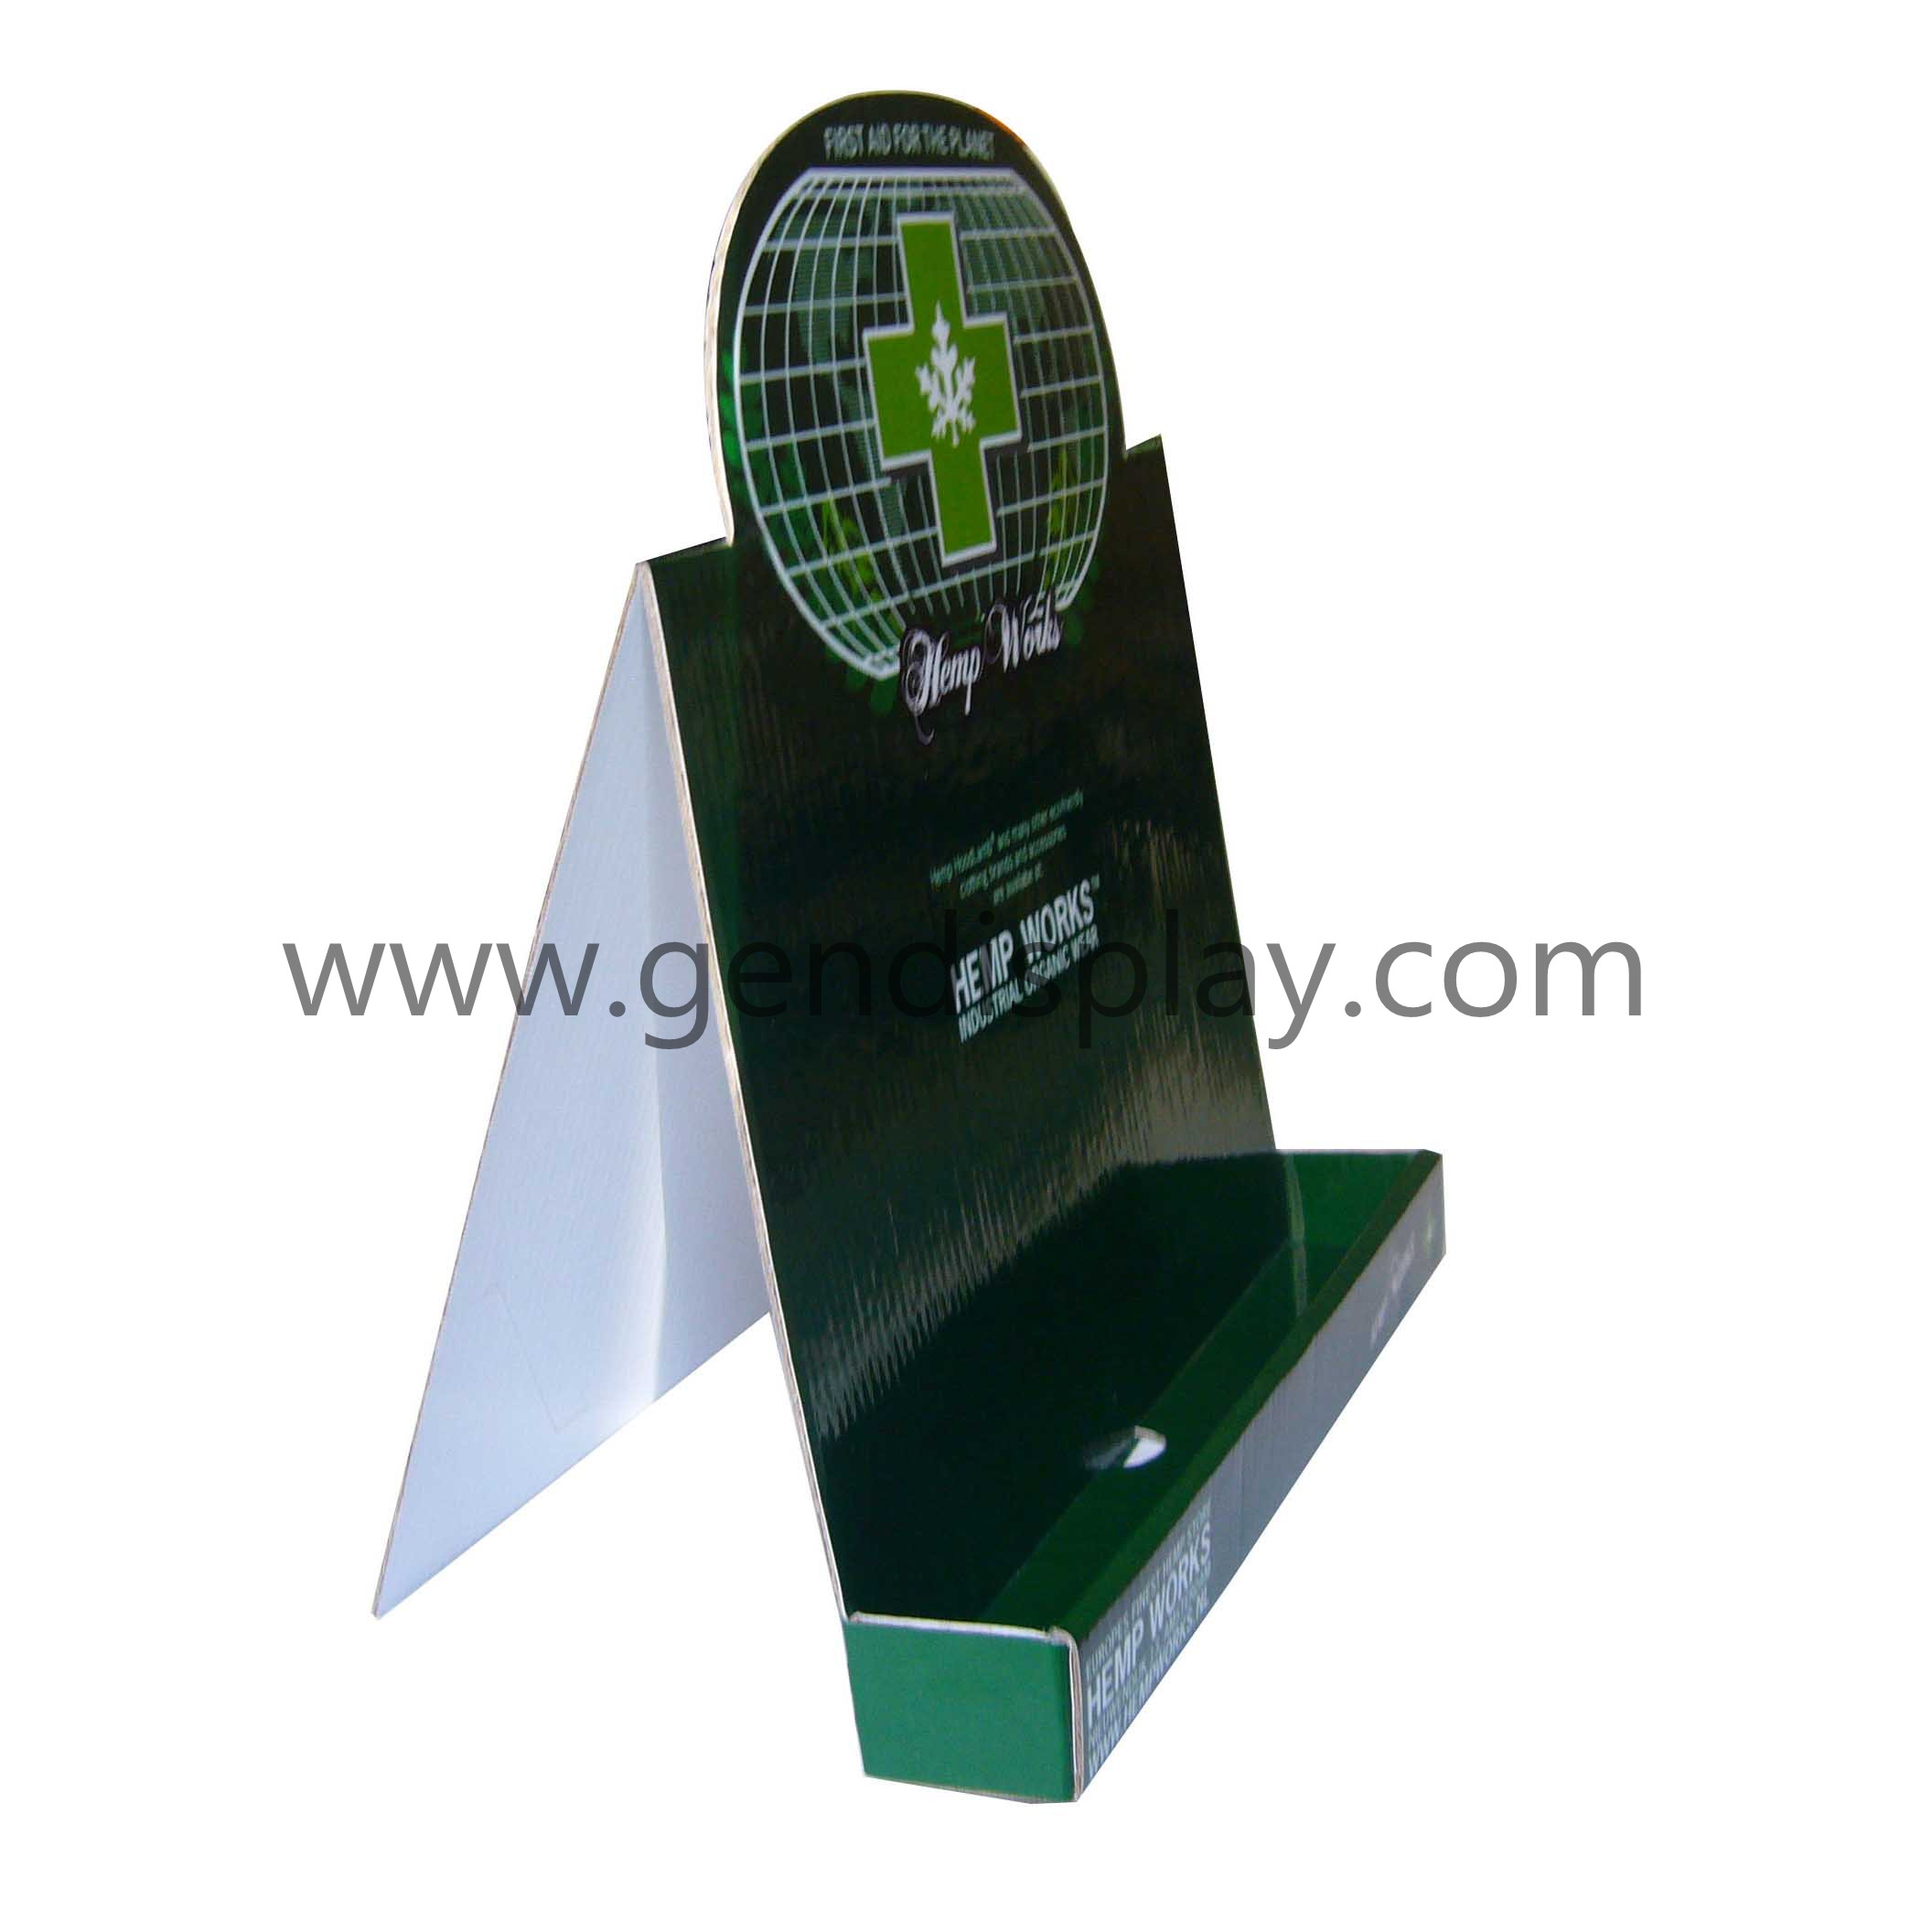 LED Light Counter Display Stand, Countertop Display(GEN-CD013)